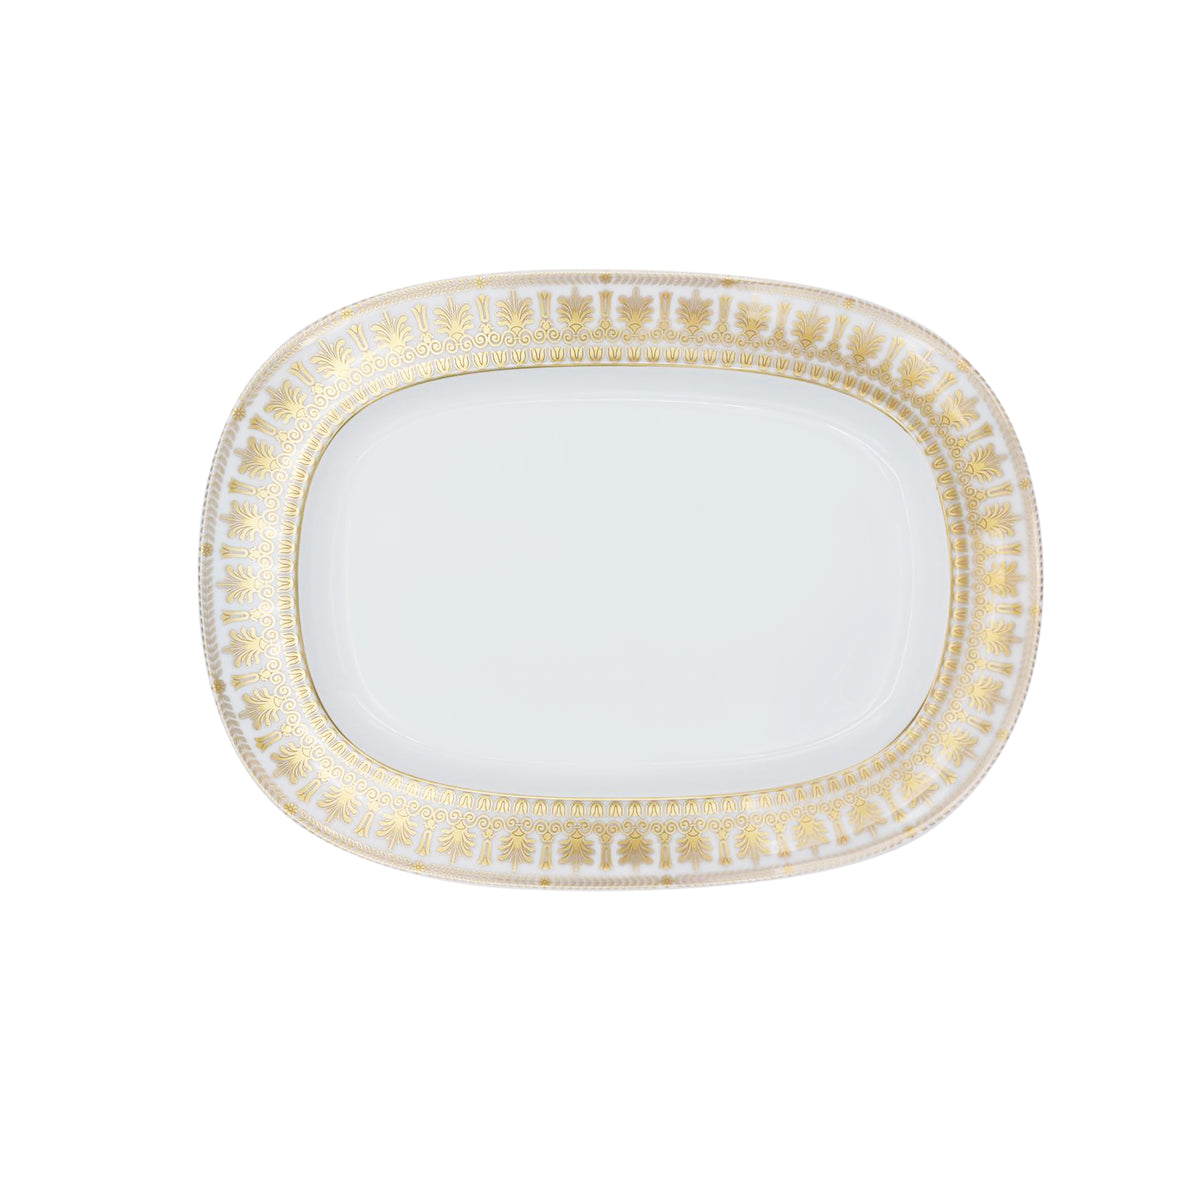 Gold EMPIRE - Oval platter, large